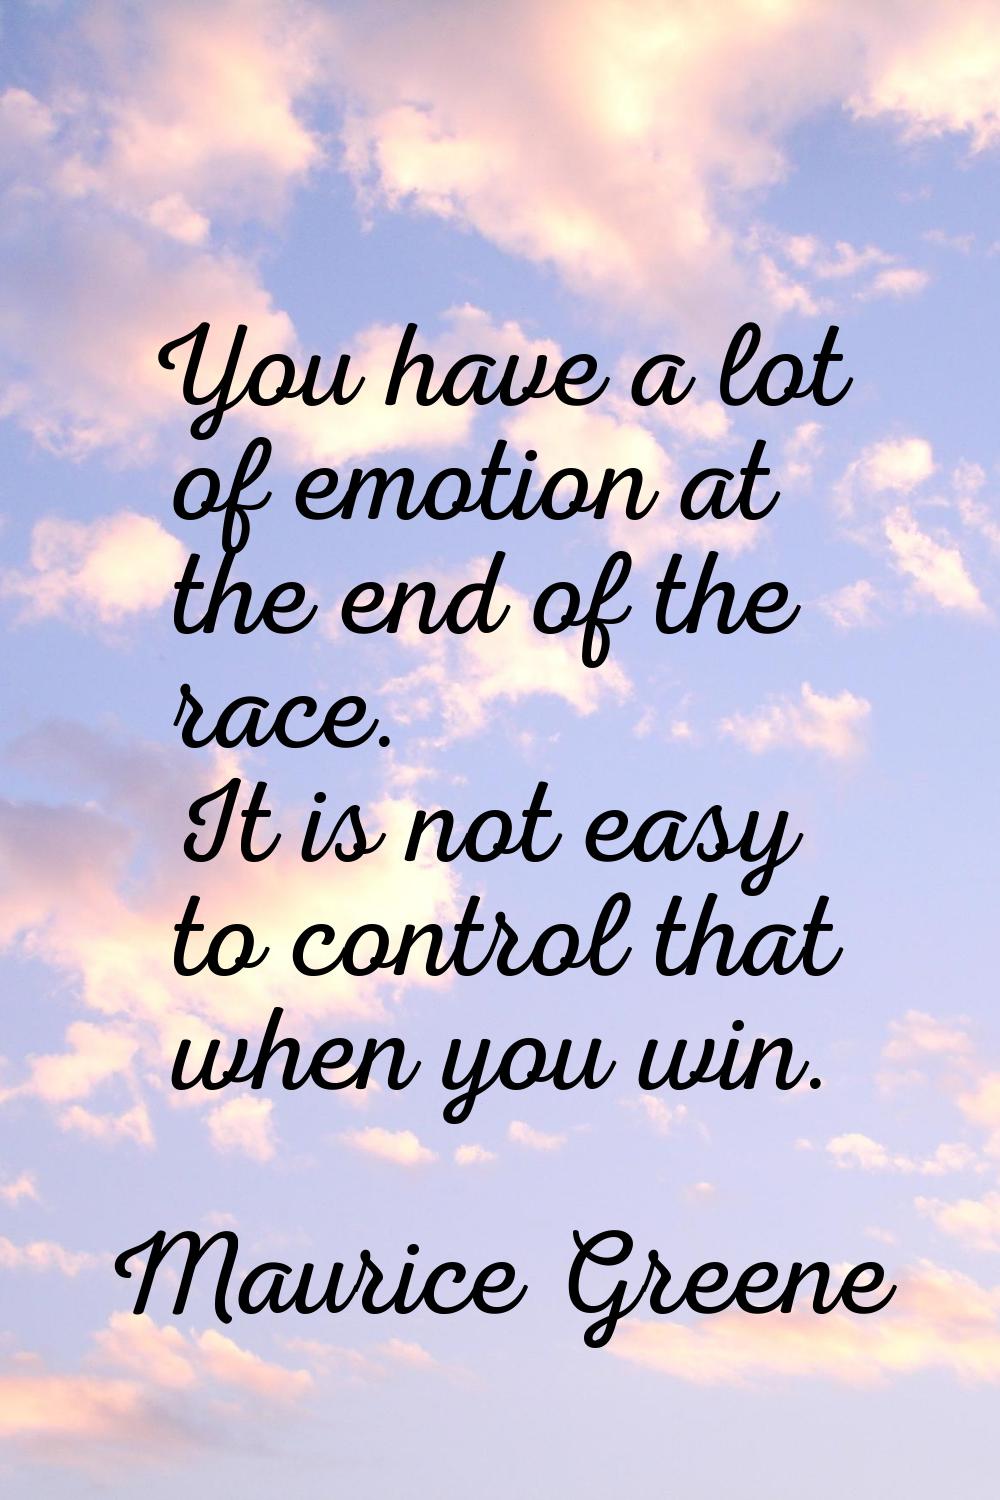 You have a lot of emotion at the end of the race. It is not easy to control that when you win.